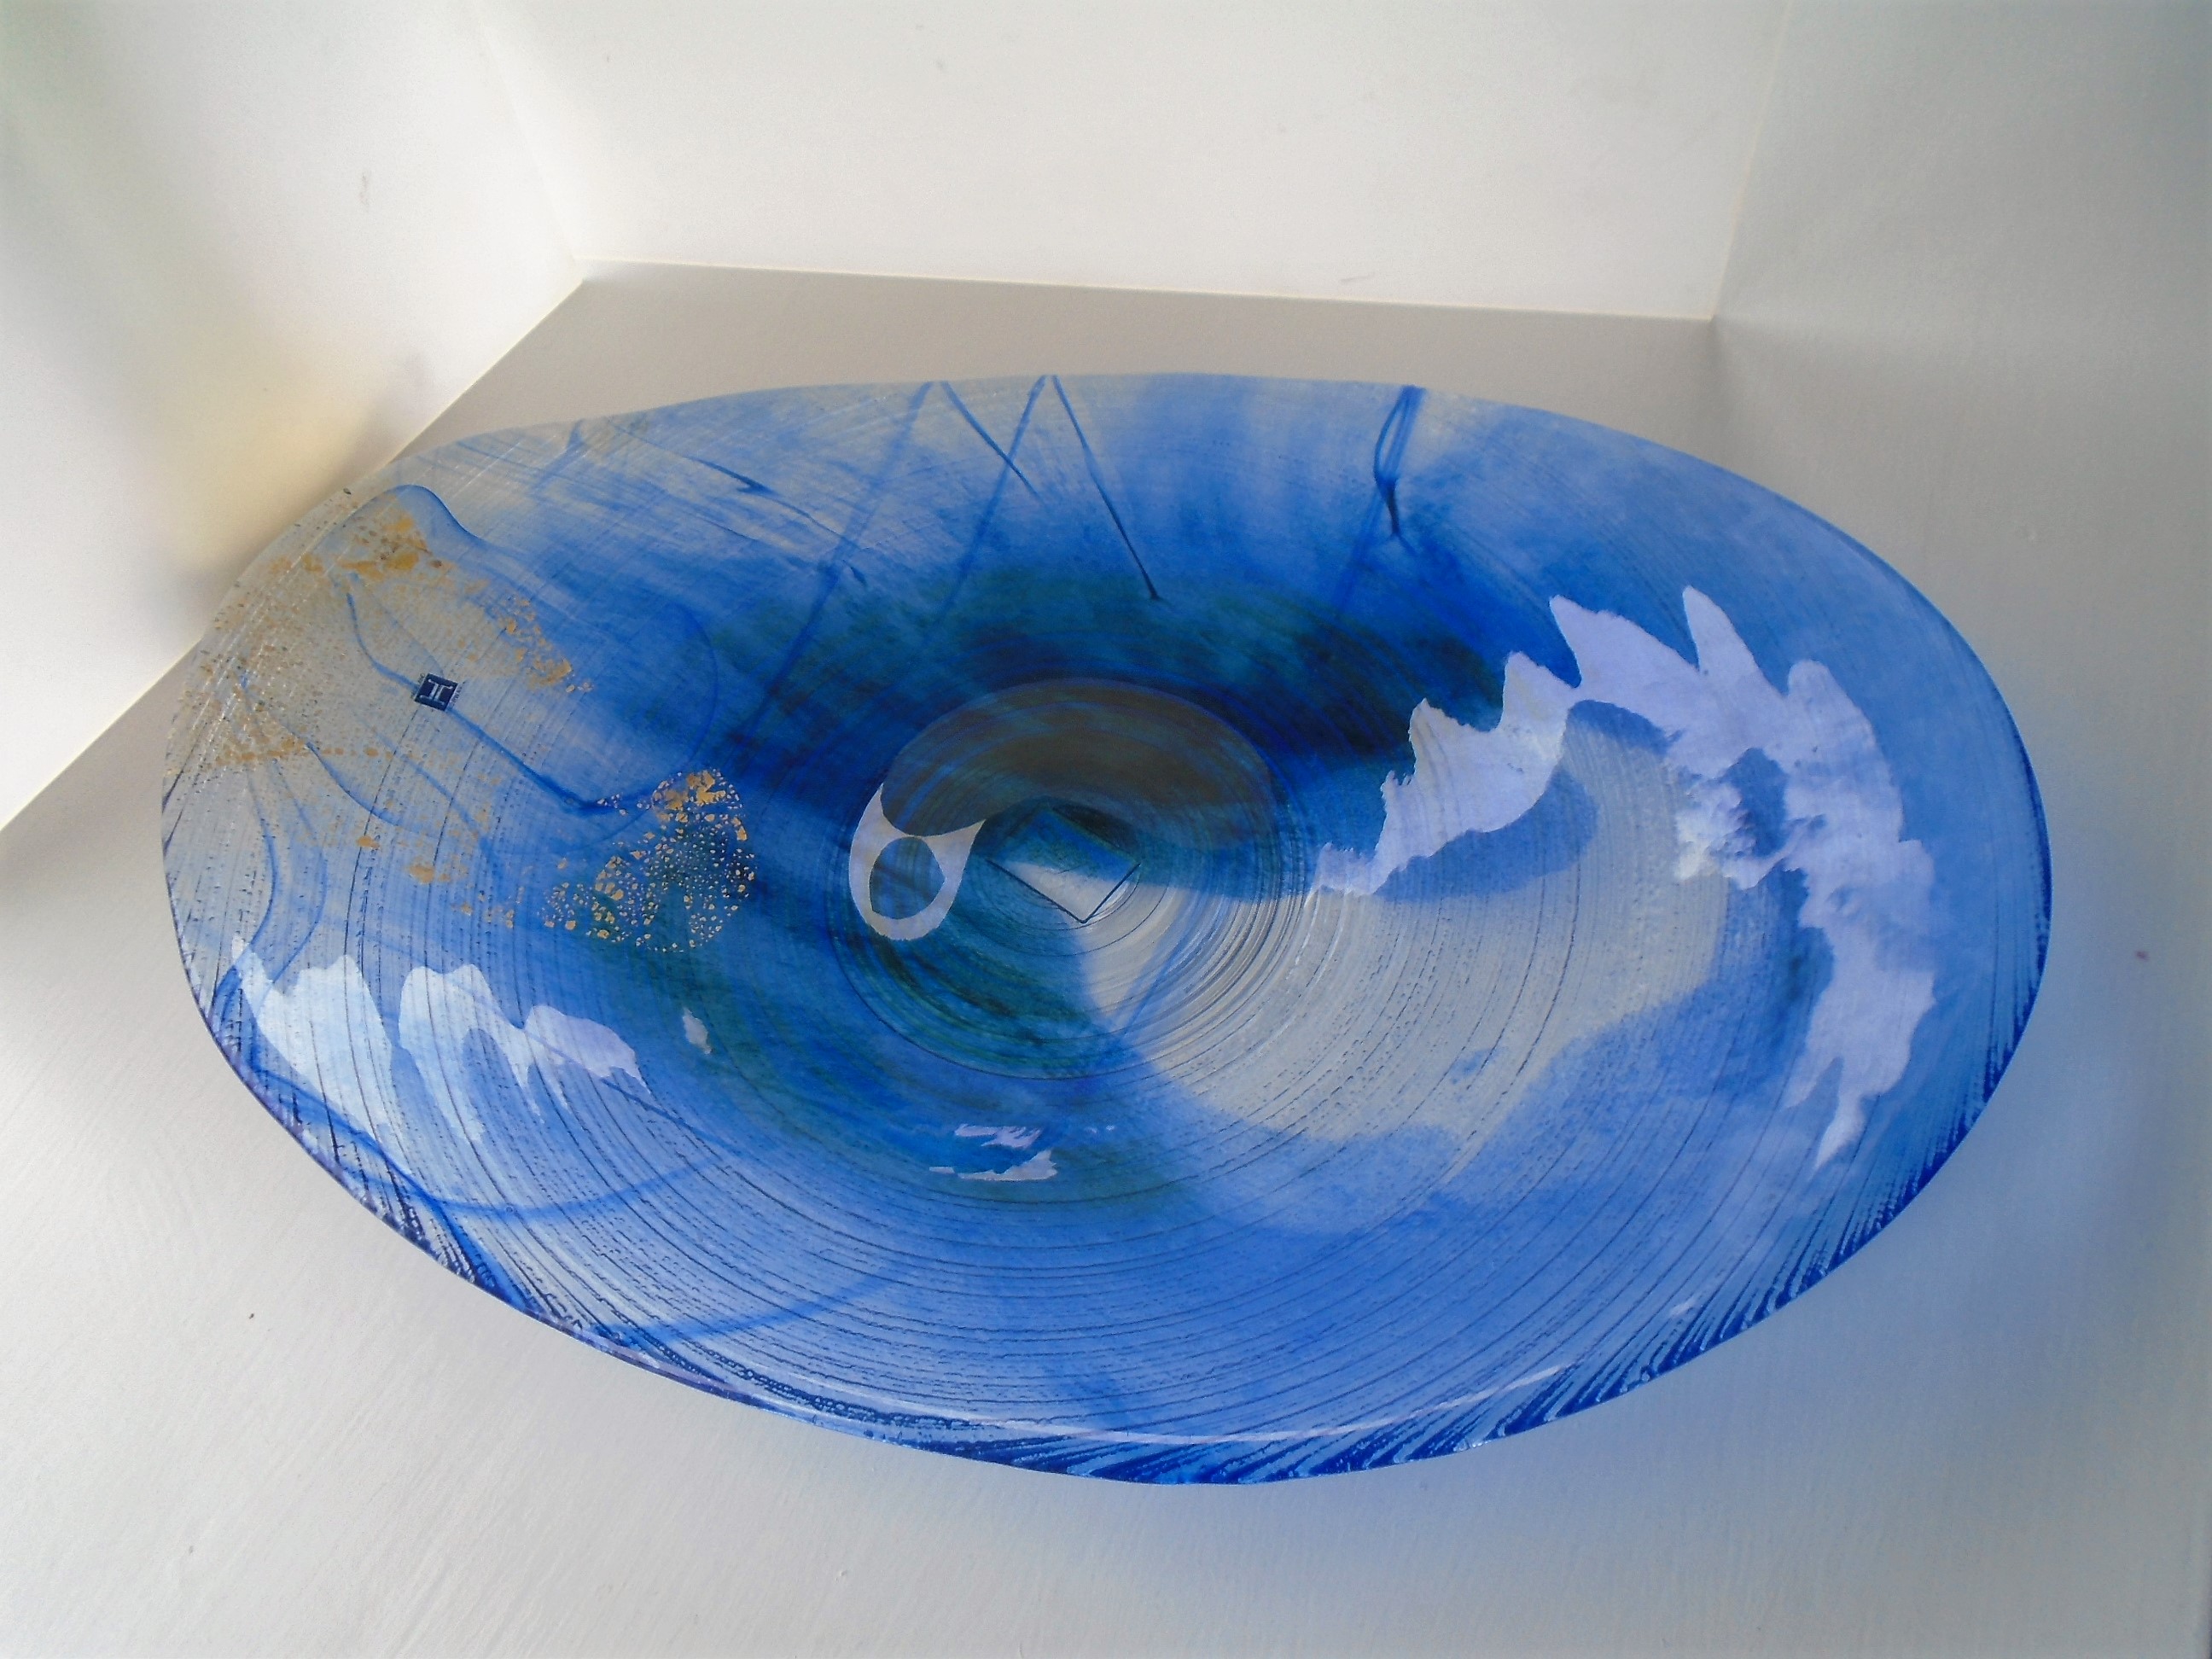 Offered for sale is a stunning example of Contemporary glass design in the form of a large oval bowl from Norwegian Maker Hadeland.  I am guessing that it is the work of Industrial Designer Lena Hansson.